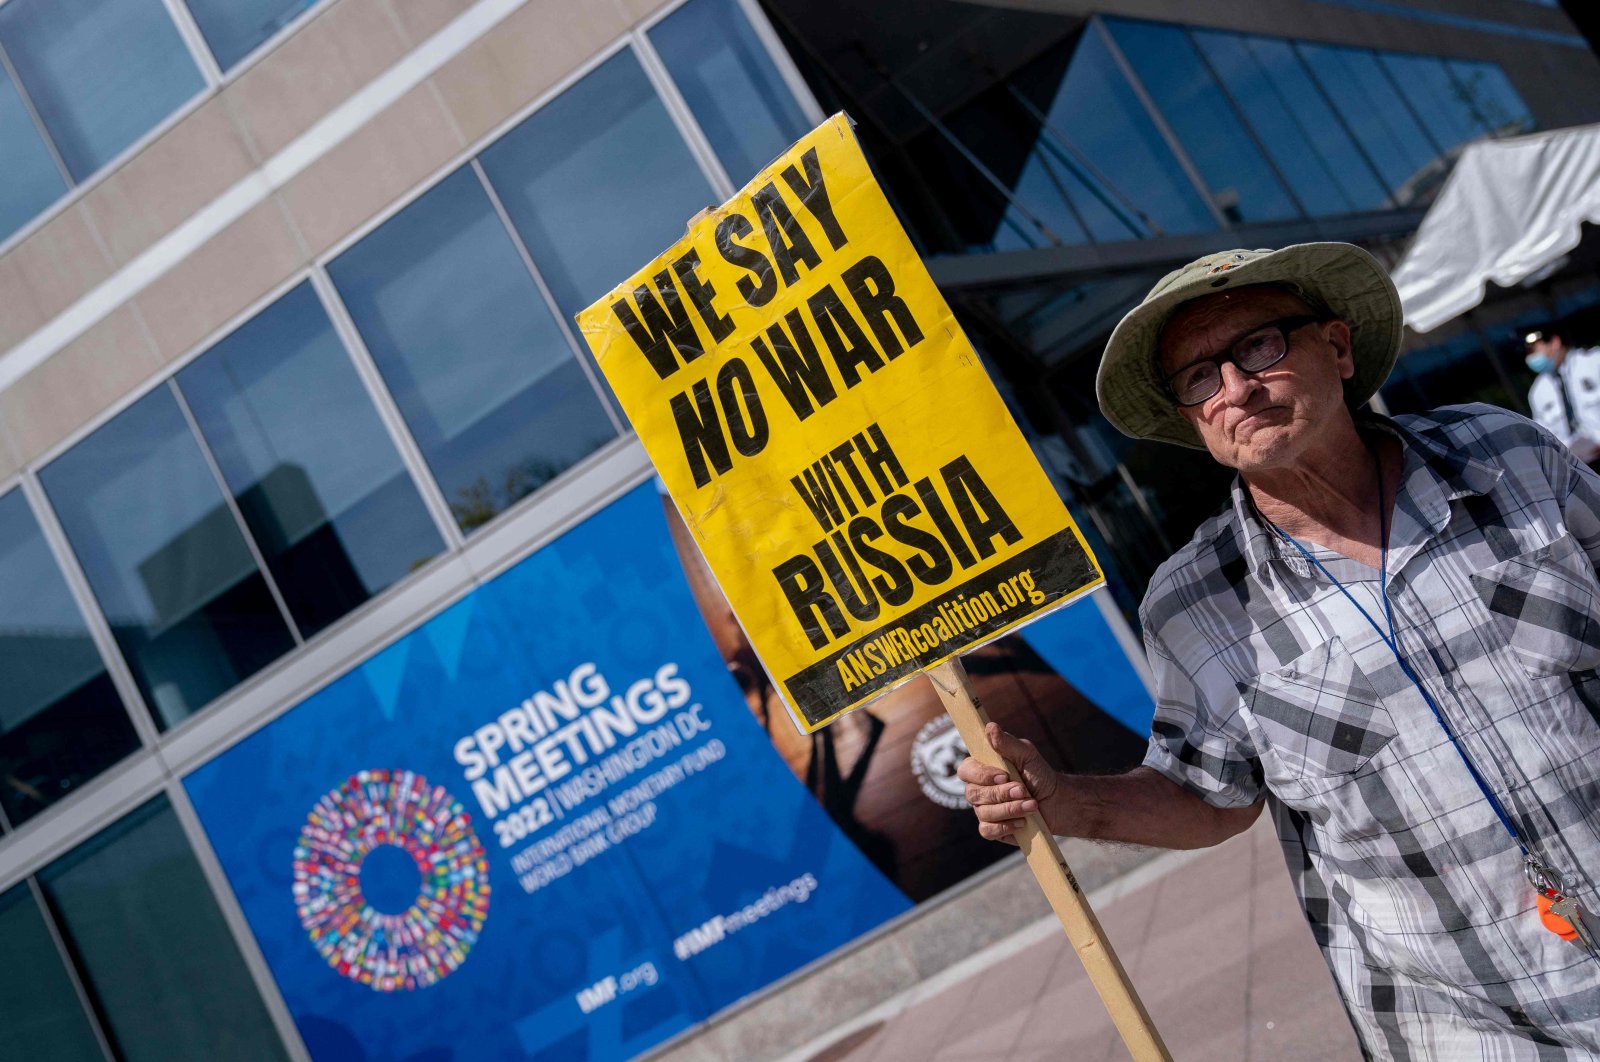 A demonstrator carries a sign against the Russian invasion of Ukraine, outside the IMF headquarters in Washington, D.C., U.S., April 22, 2022. (AFP Photo)